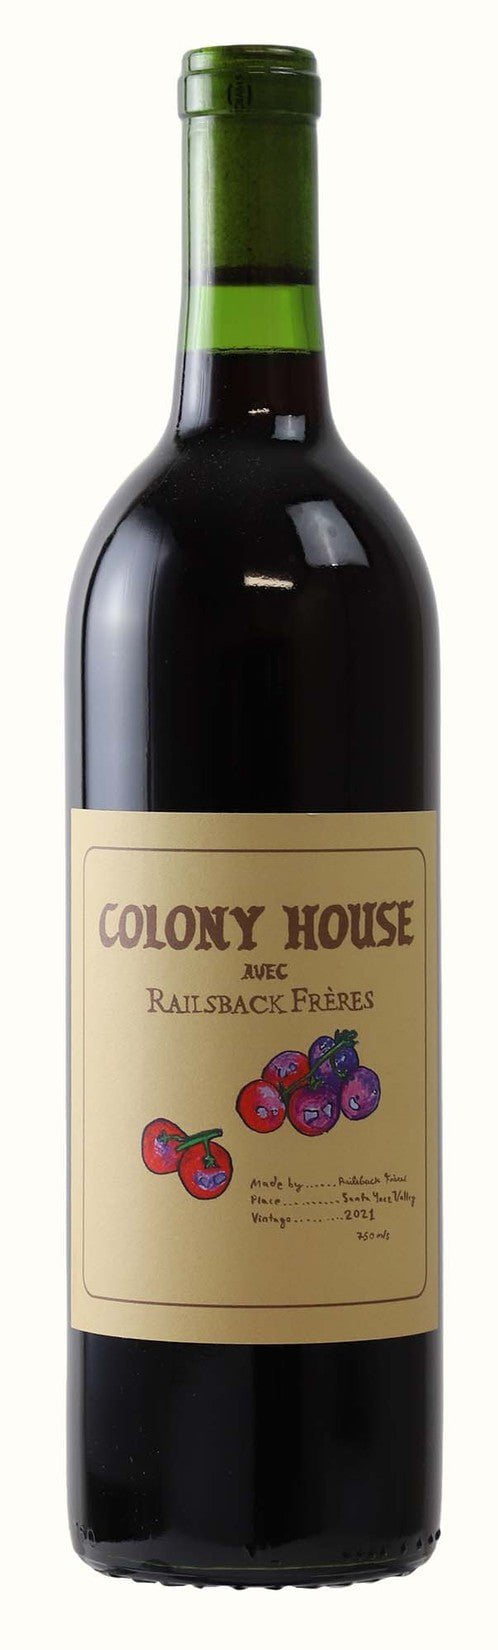 Grassroots Wine Railsback Freres Colony House Rouge